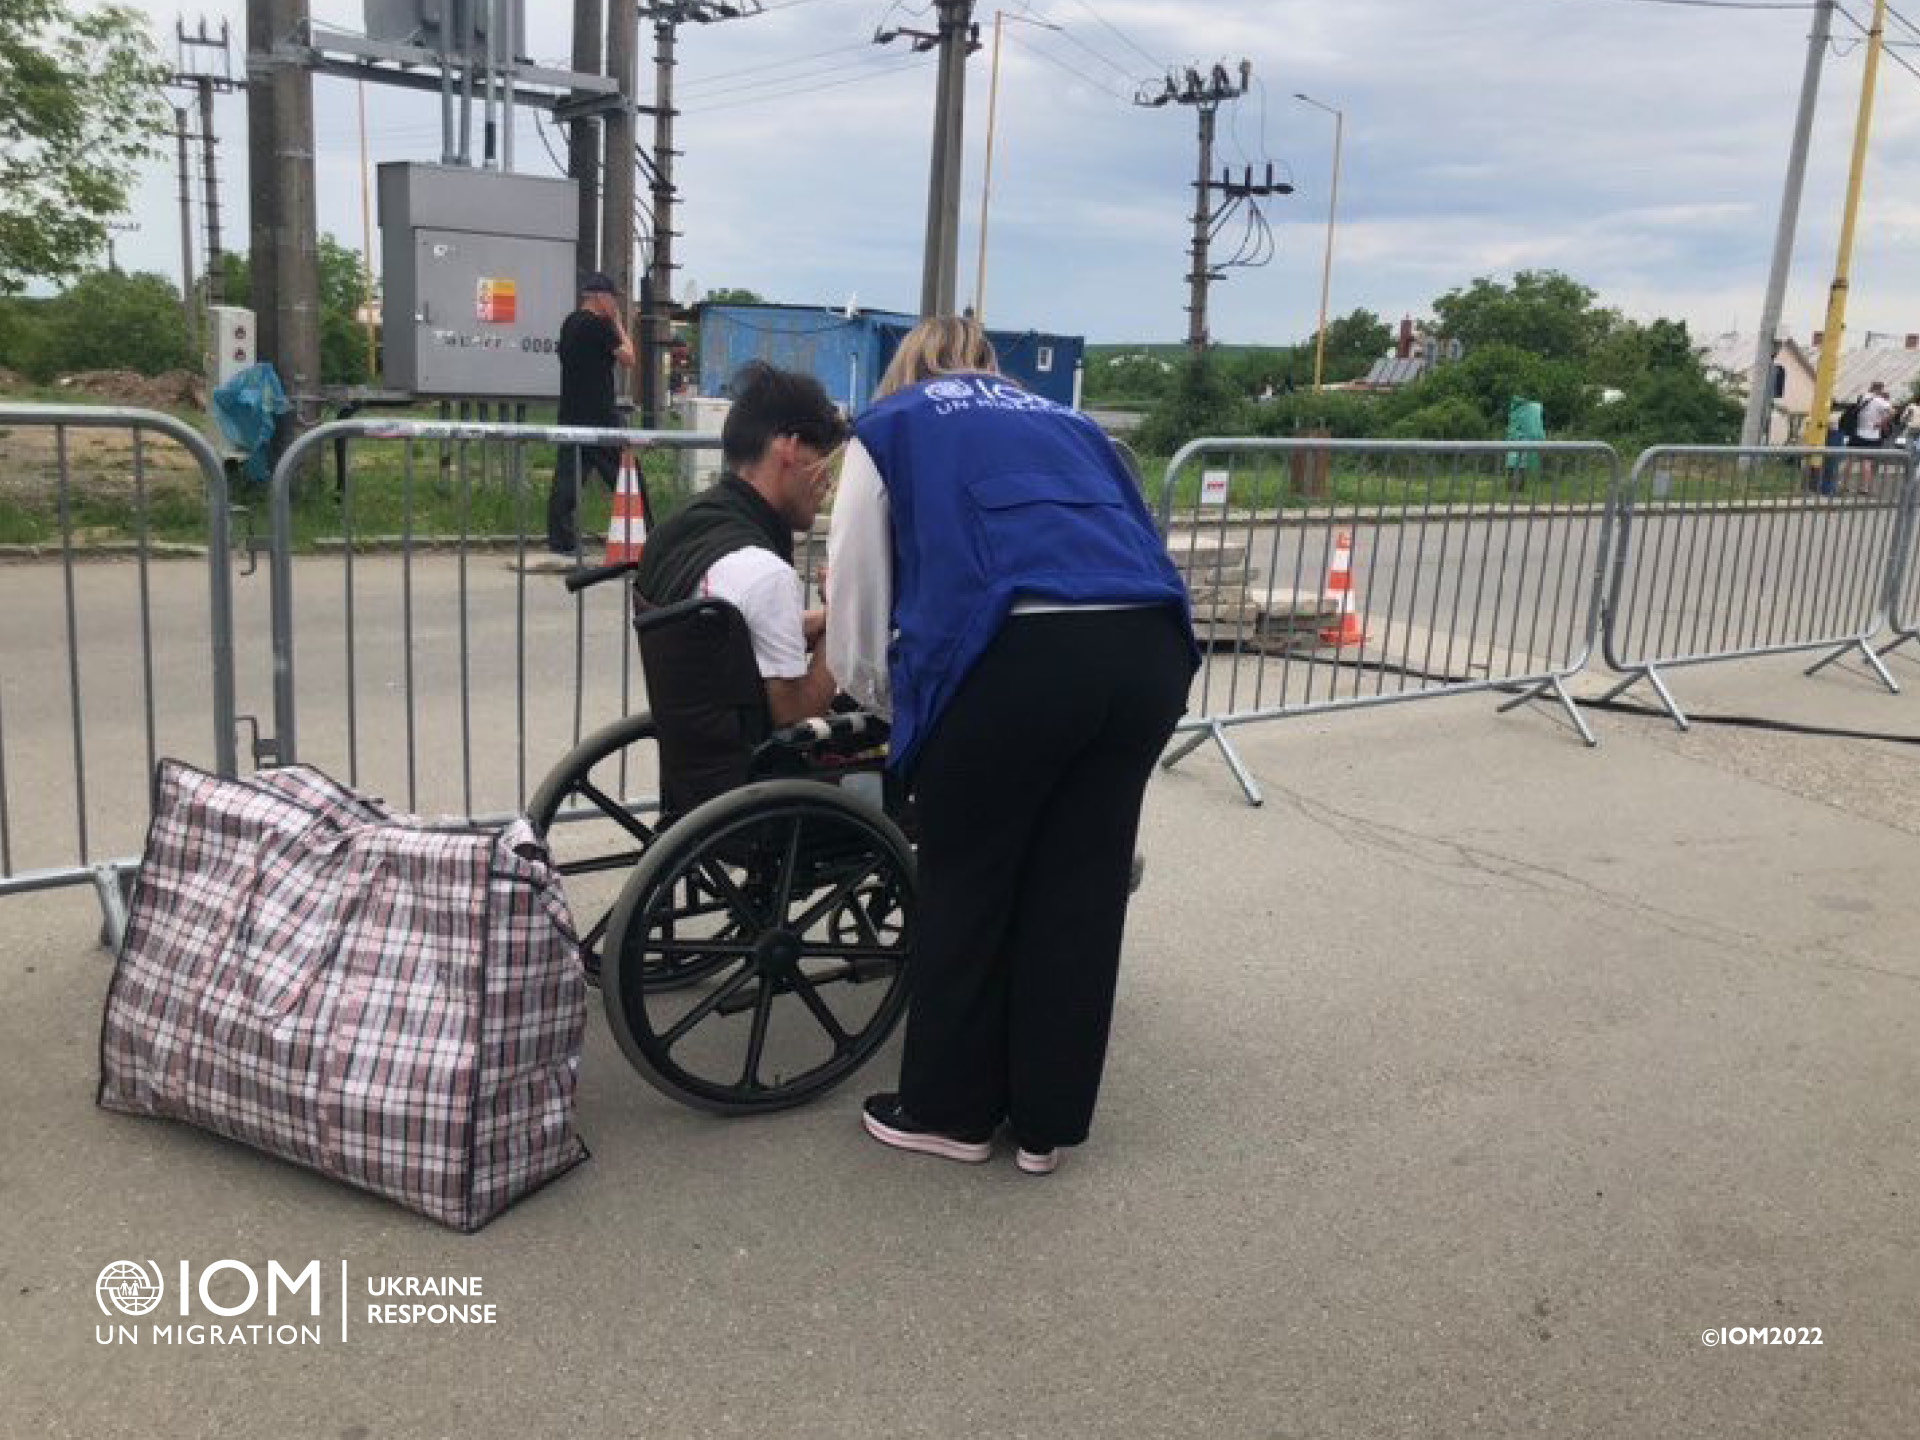 IOM Slovakia consultant providing assistance to vulnerable people with disabilities fleeing war in Ukraine. Photo © International Organization for Migration (IOM) 2022.